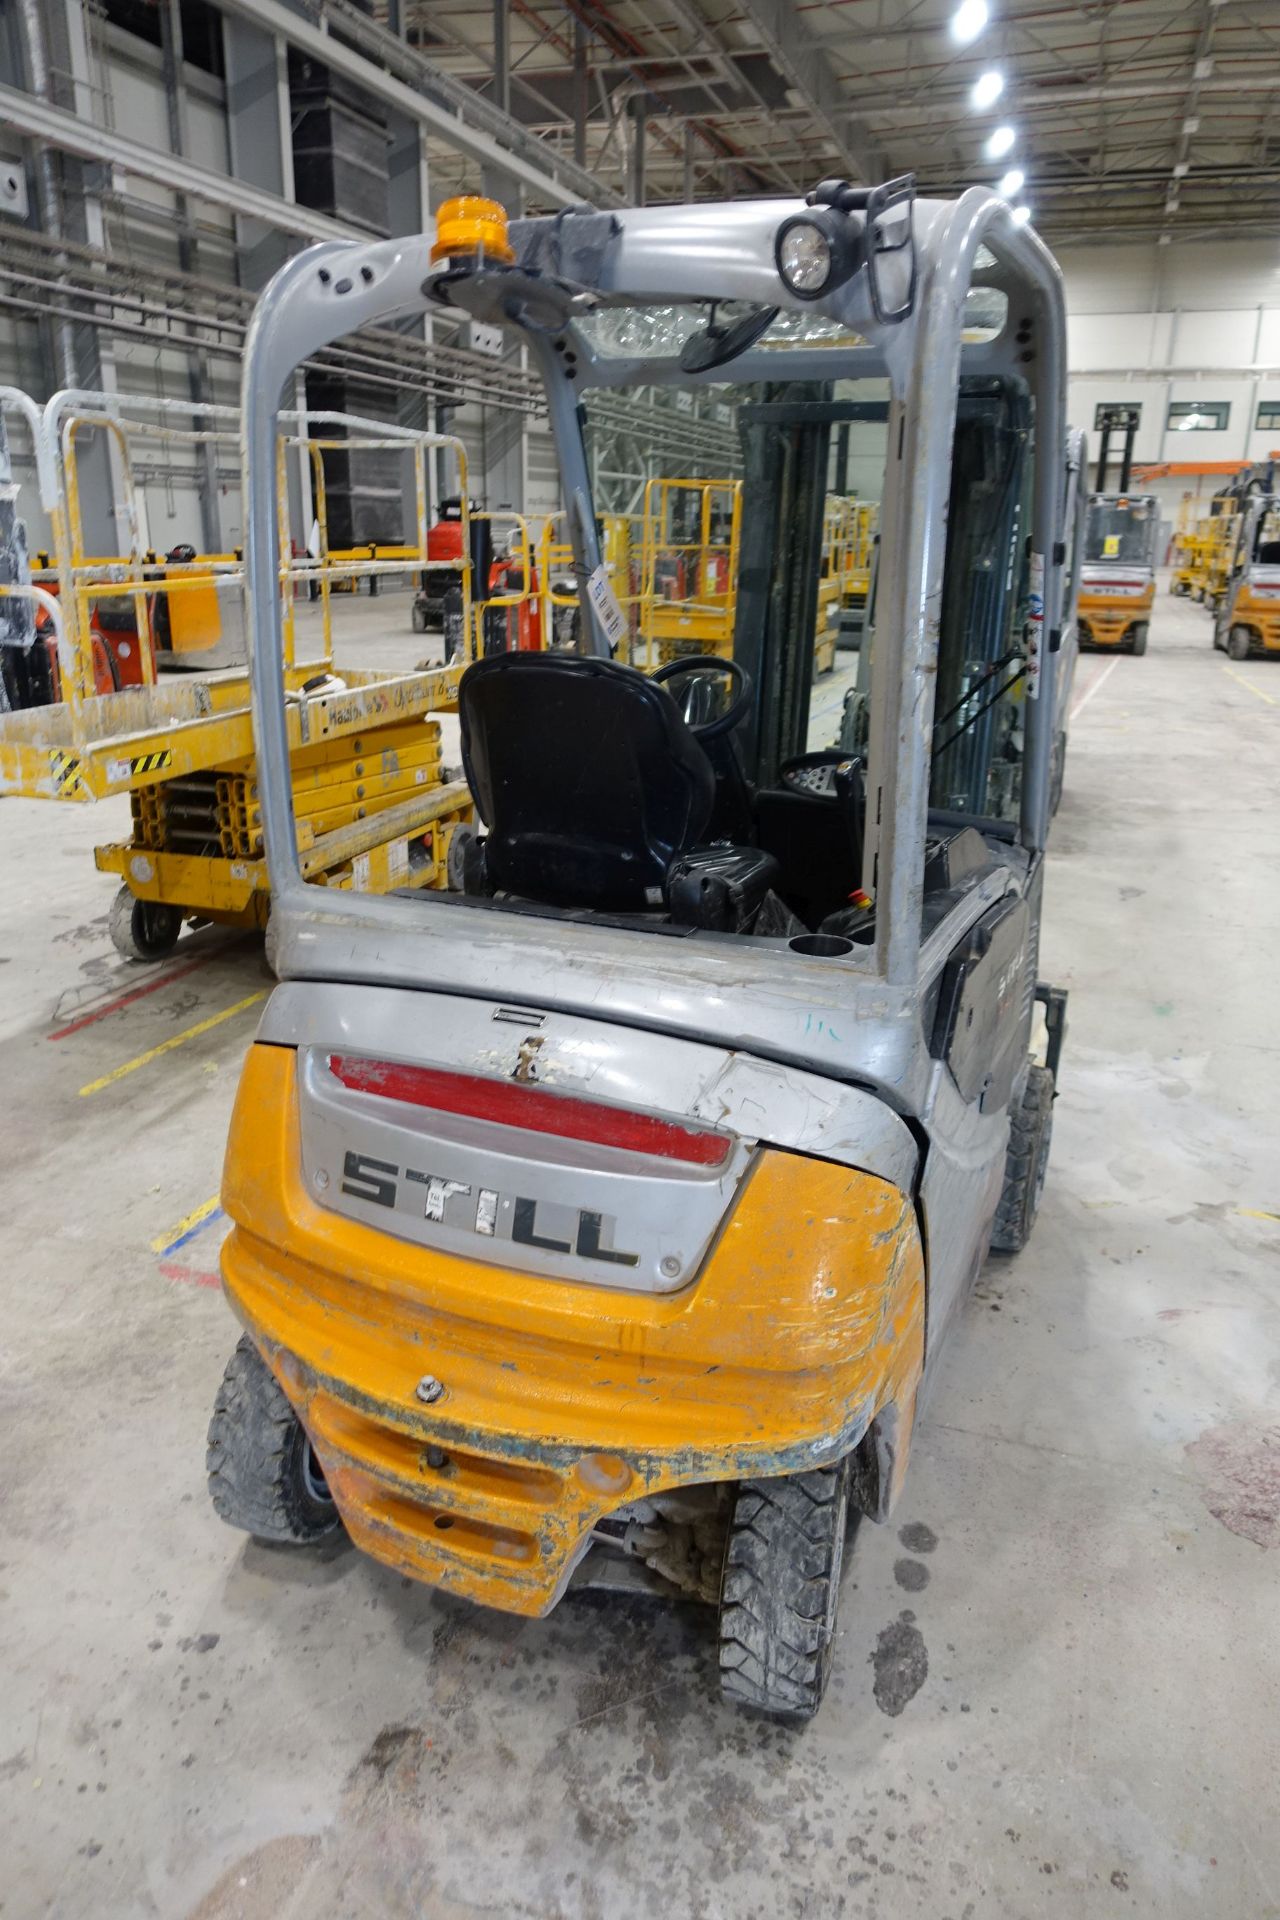 STILL RX20-20P Electric Forklift Truck, 2,000kg Capacity with Sideshift, Ser # 516216H00371 (2017) - Image 13 of 42